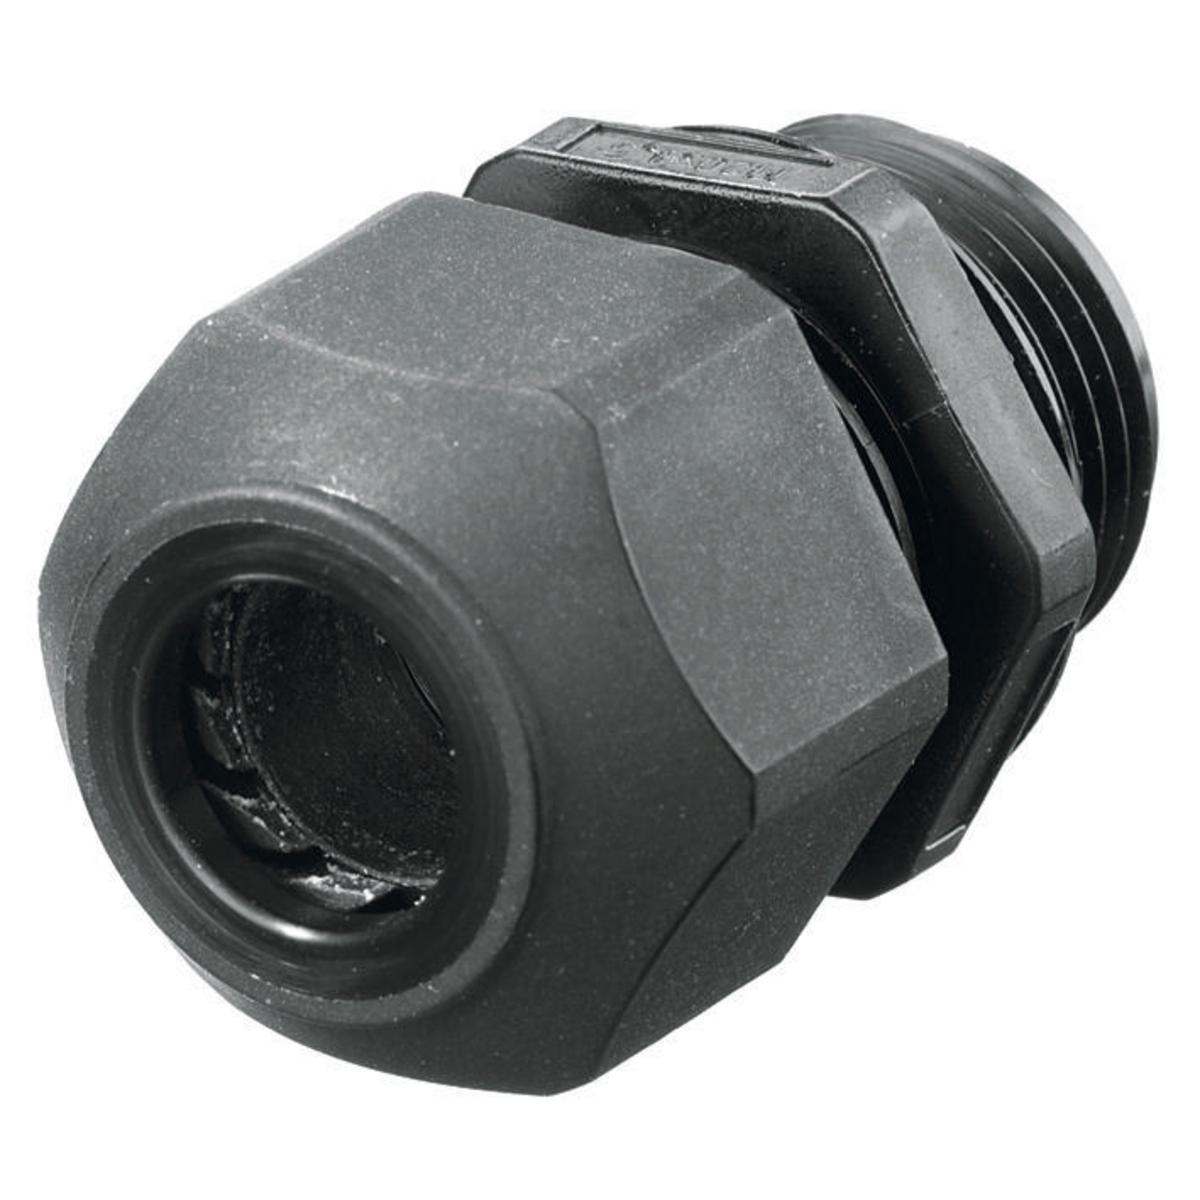 Hubbell SEC75BA Kellems Wire Management, Cord Connectors, European Style, .45-.71", 3/4", Black  ; Low profile ; Connector body is a one-piece design with machined threads ; Standard Product